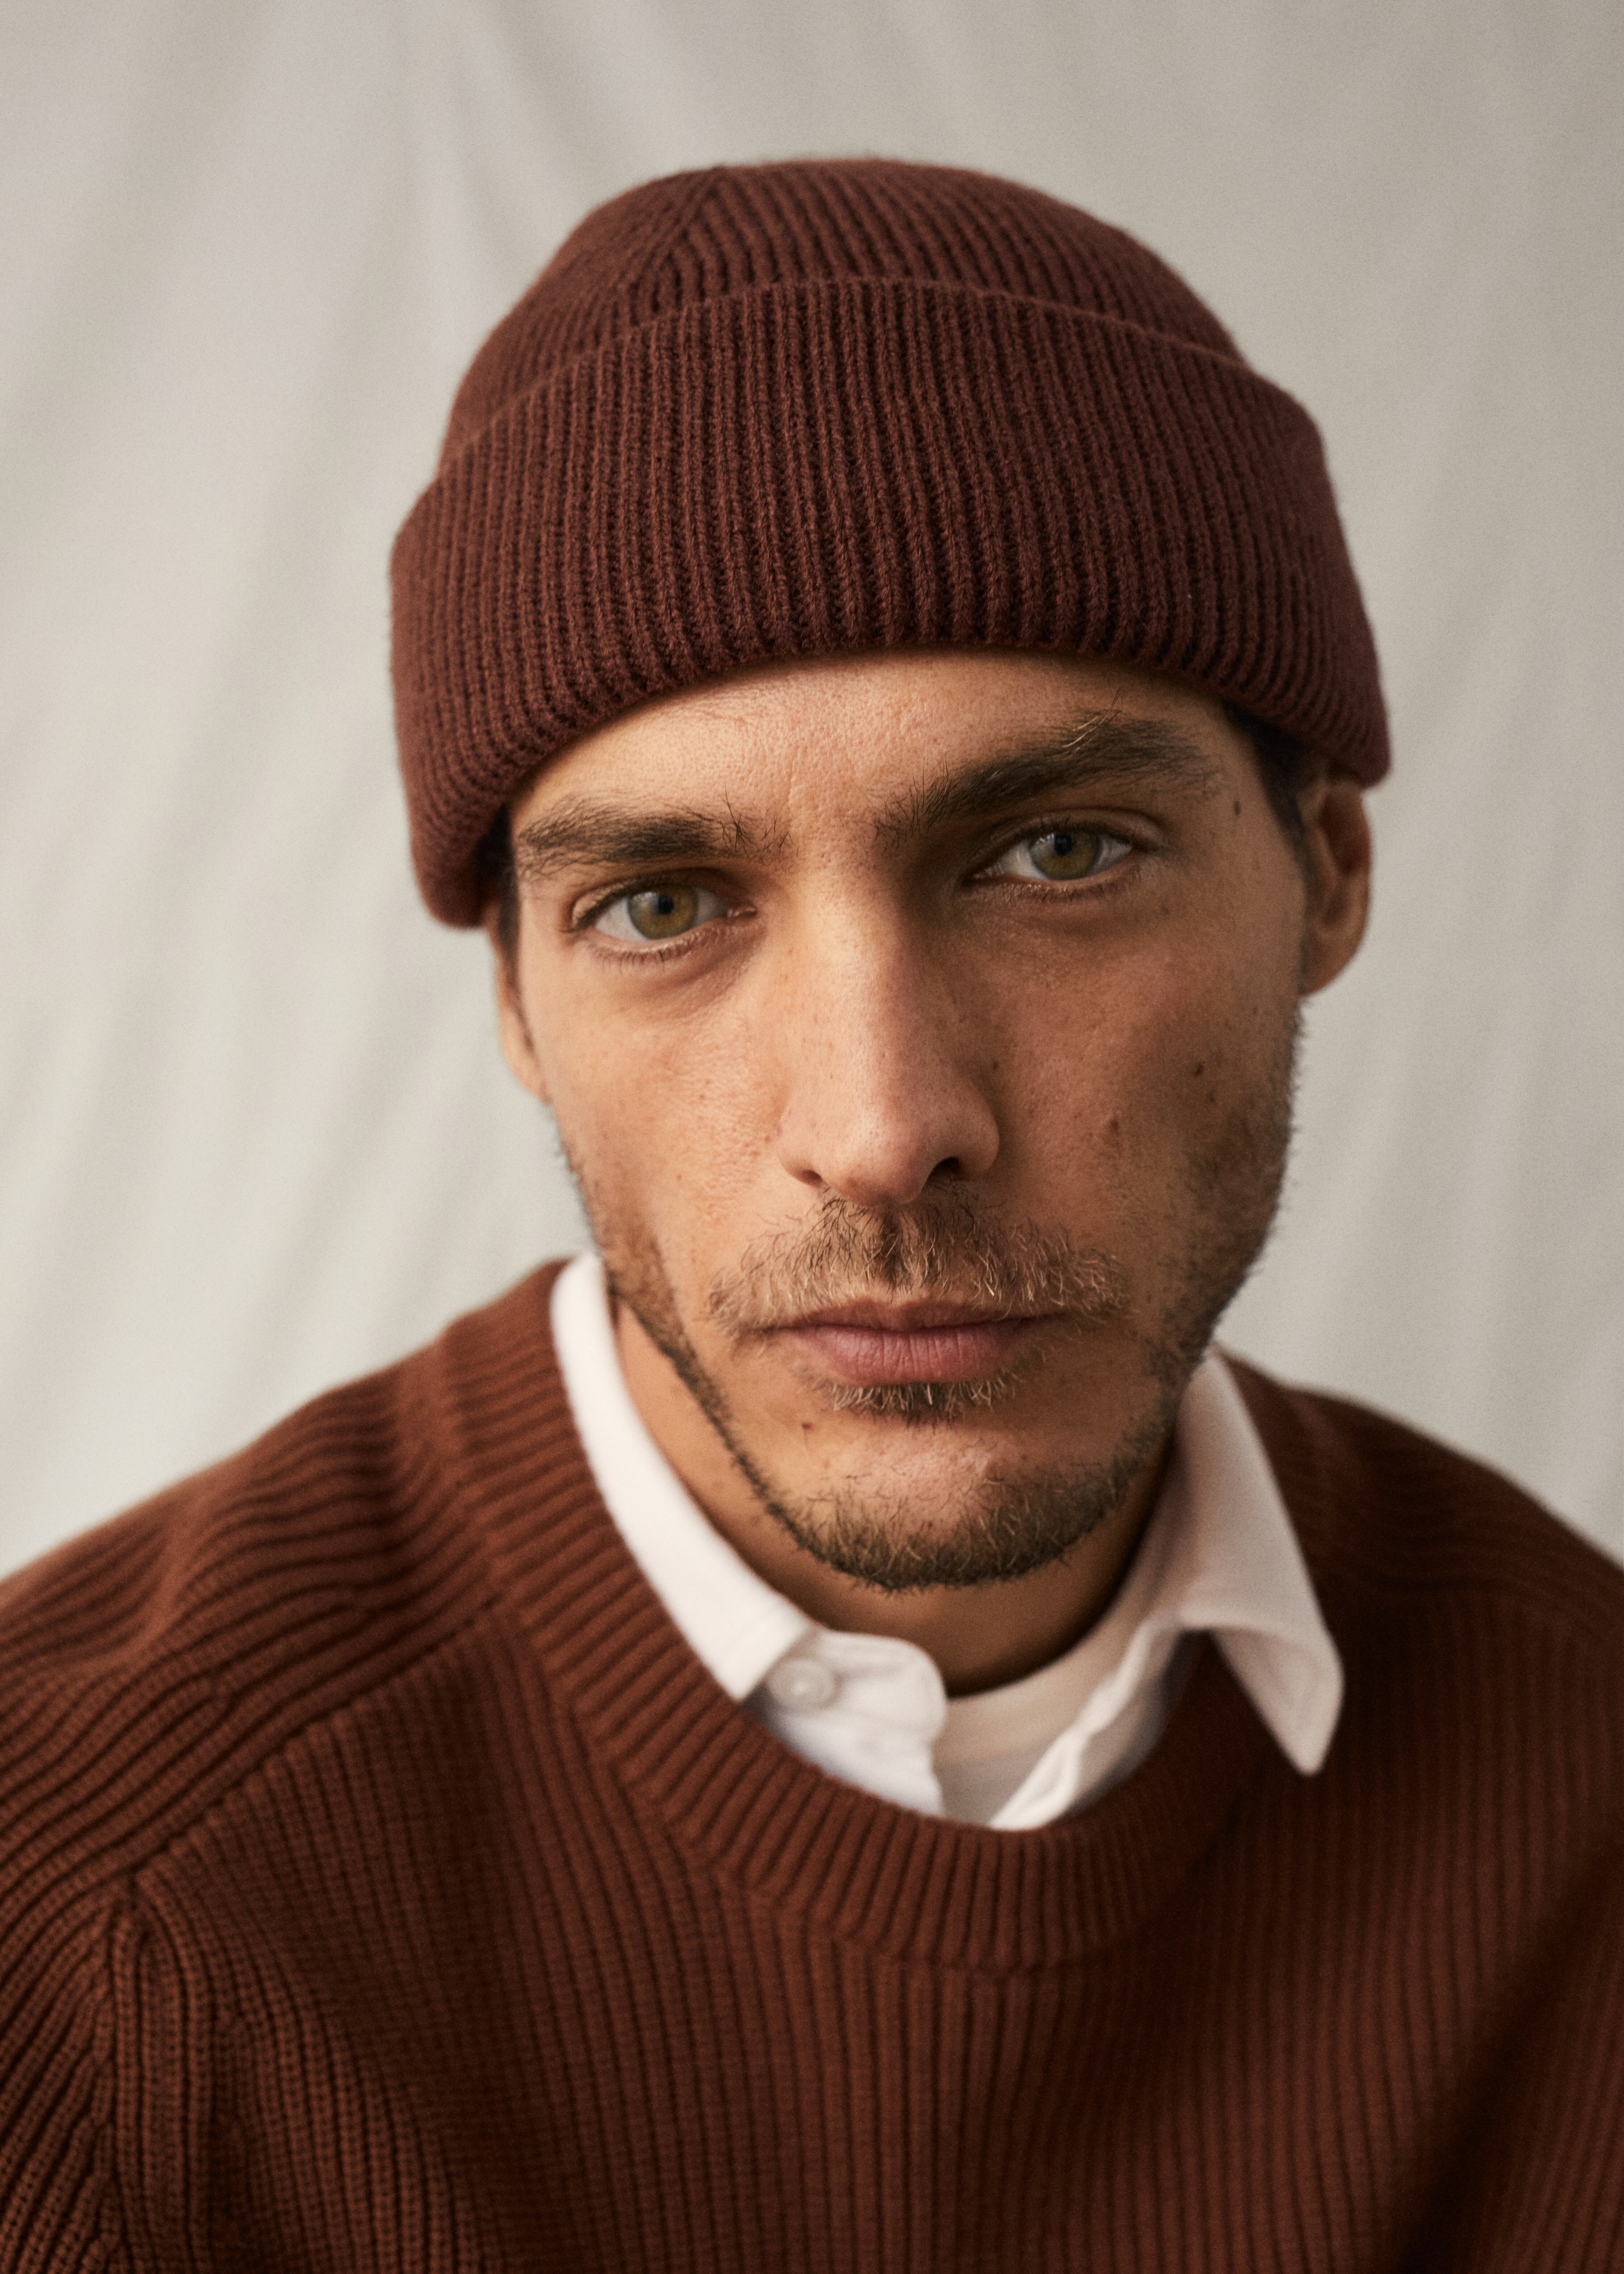 Short knitted hat - Details of the article 5